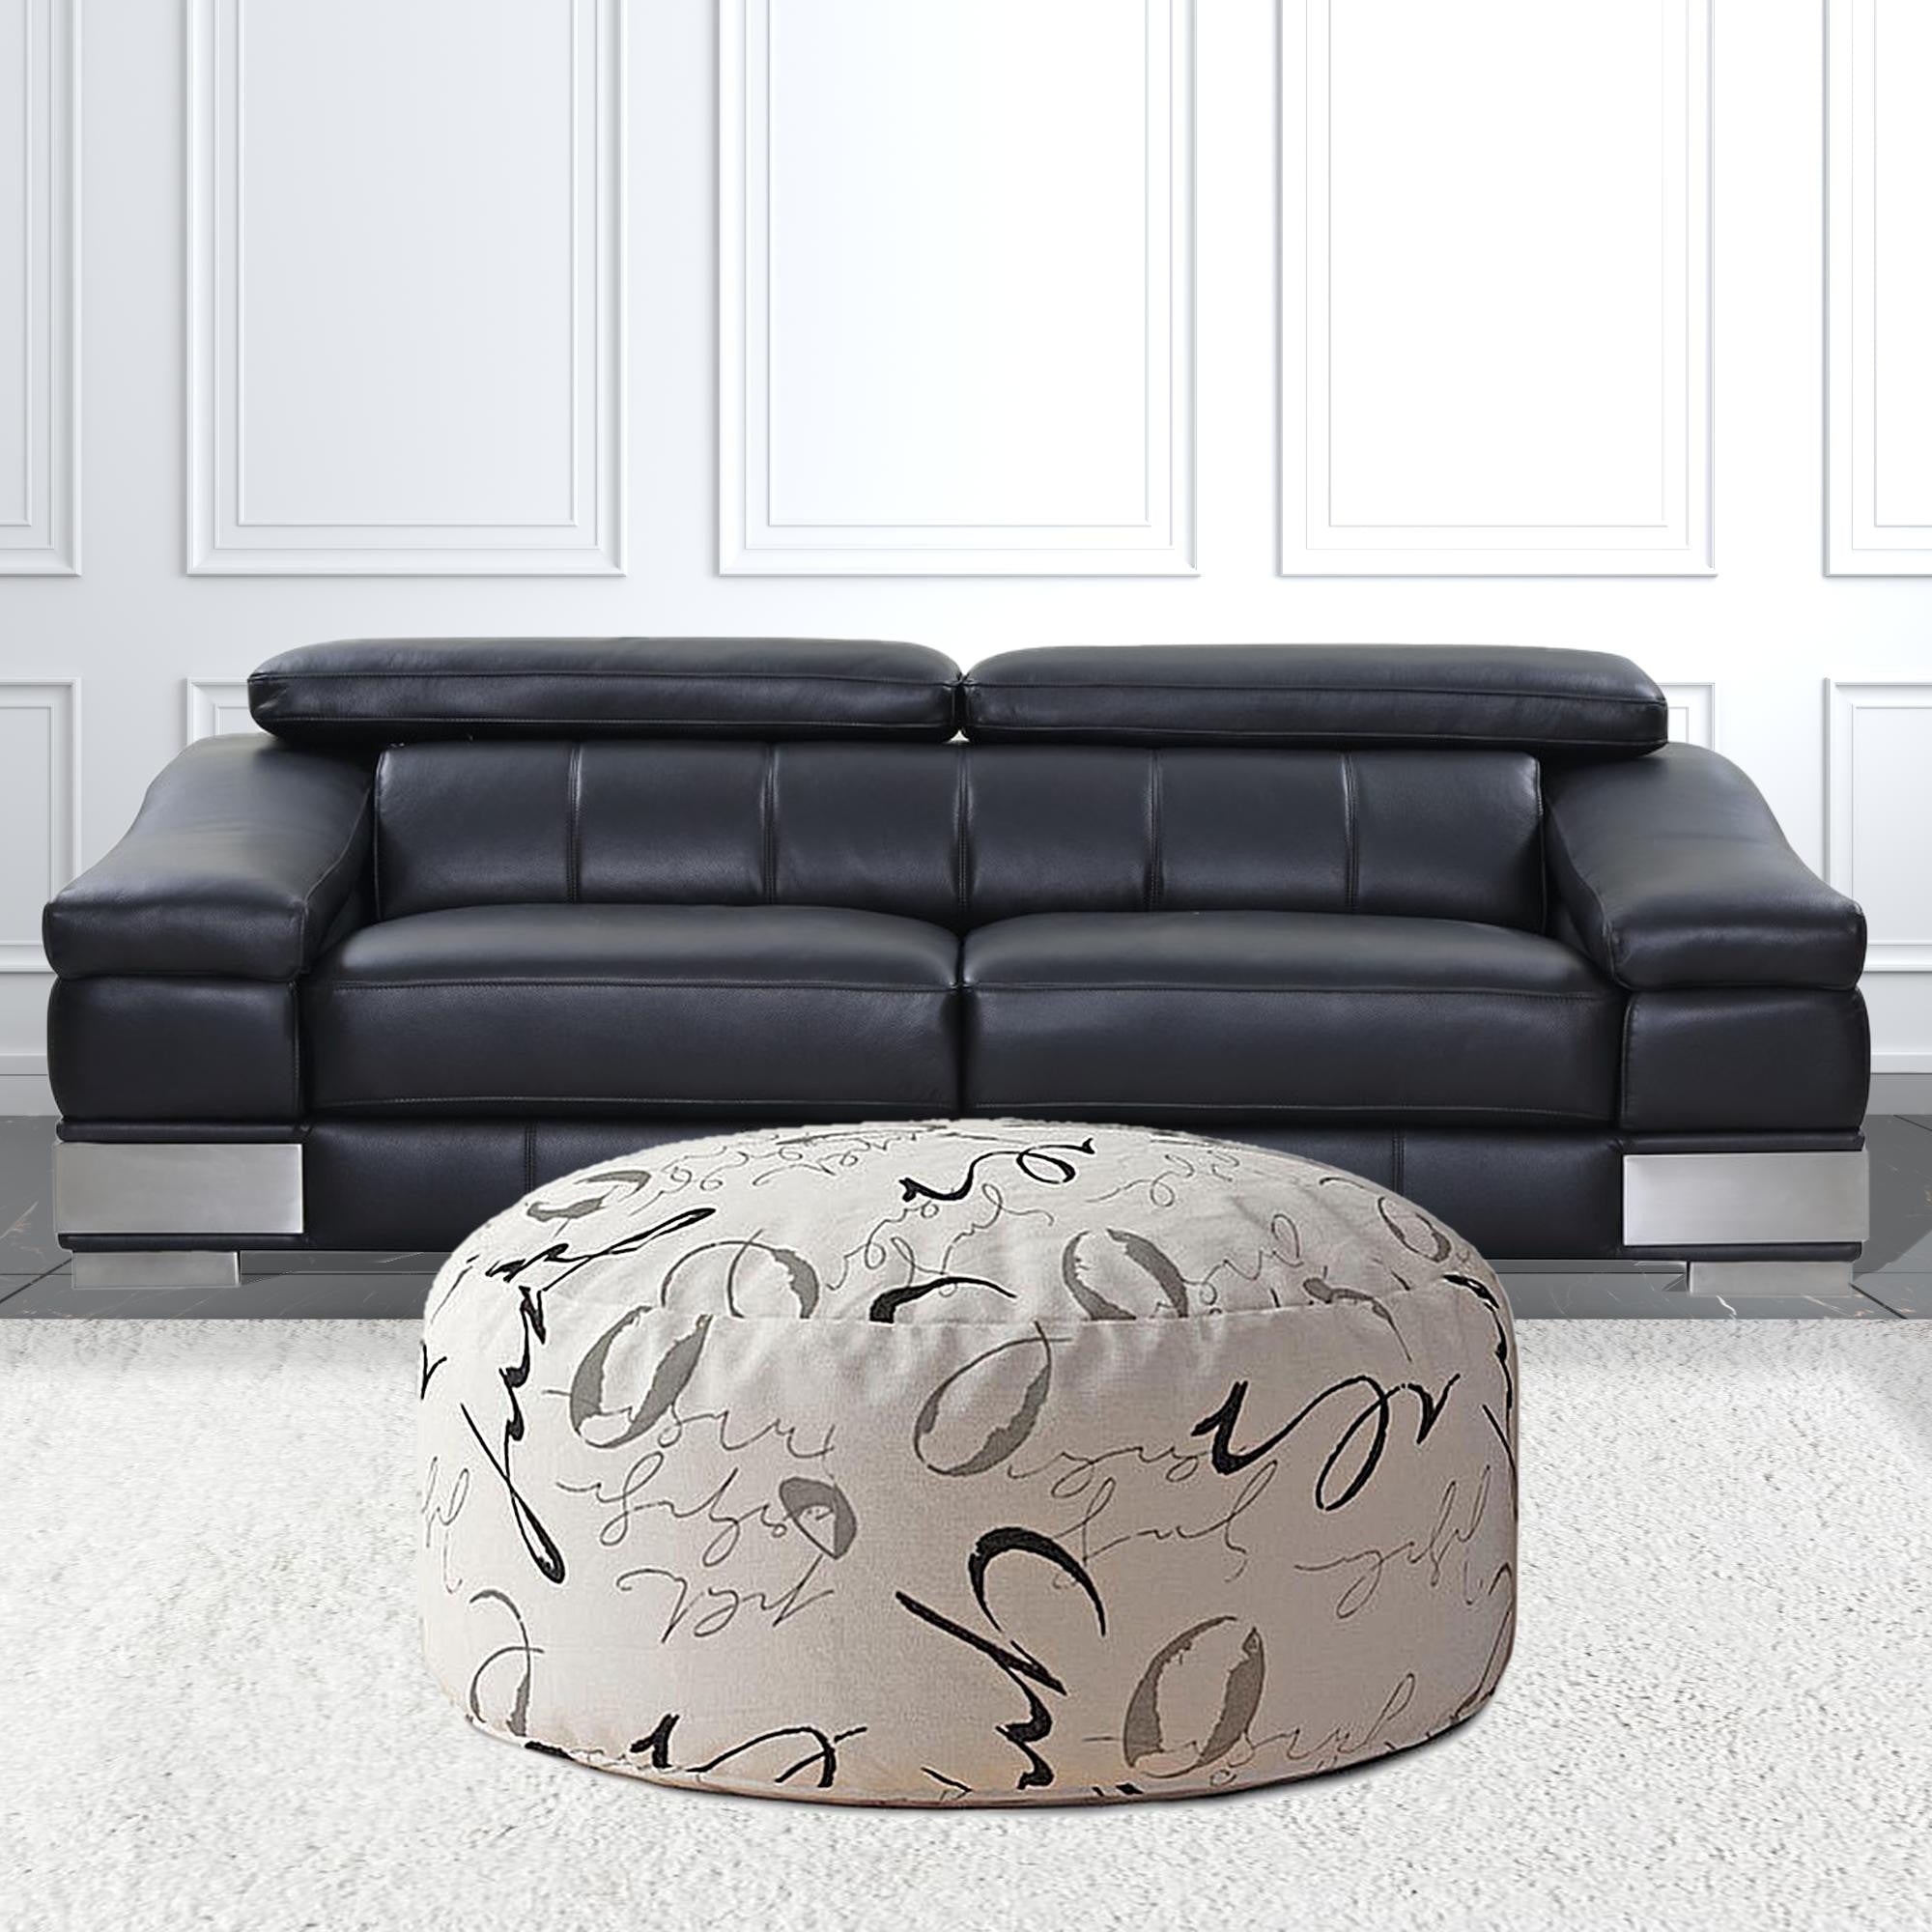 24" Black Polyester Round Abstract Pouf Ottoman